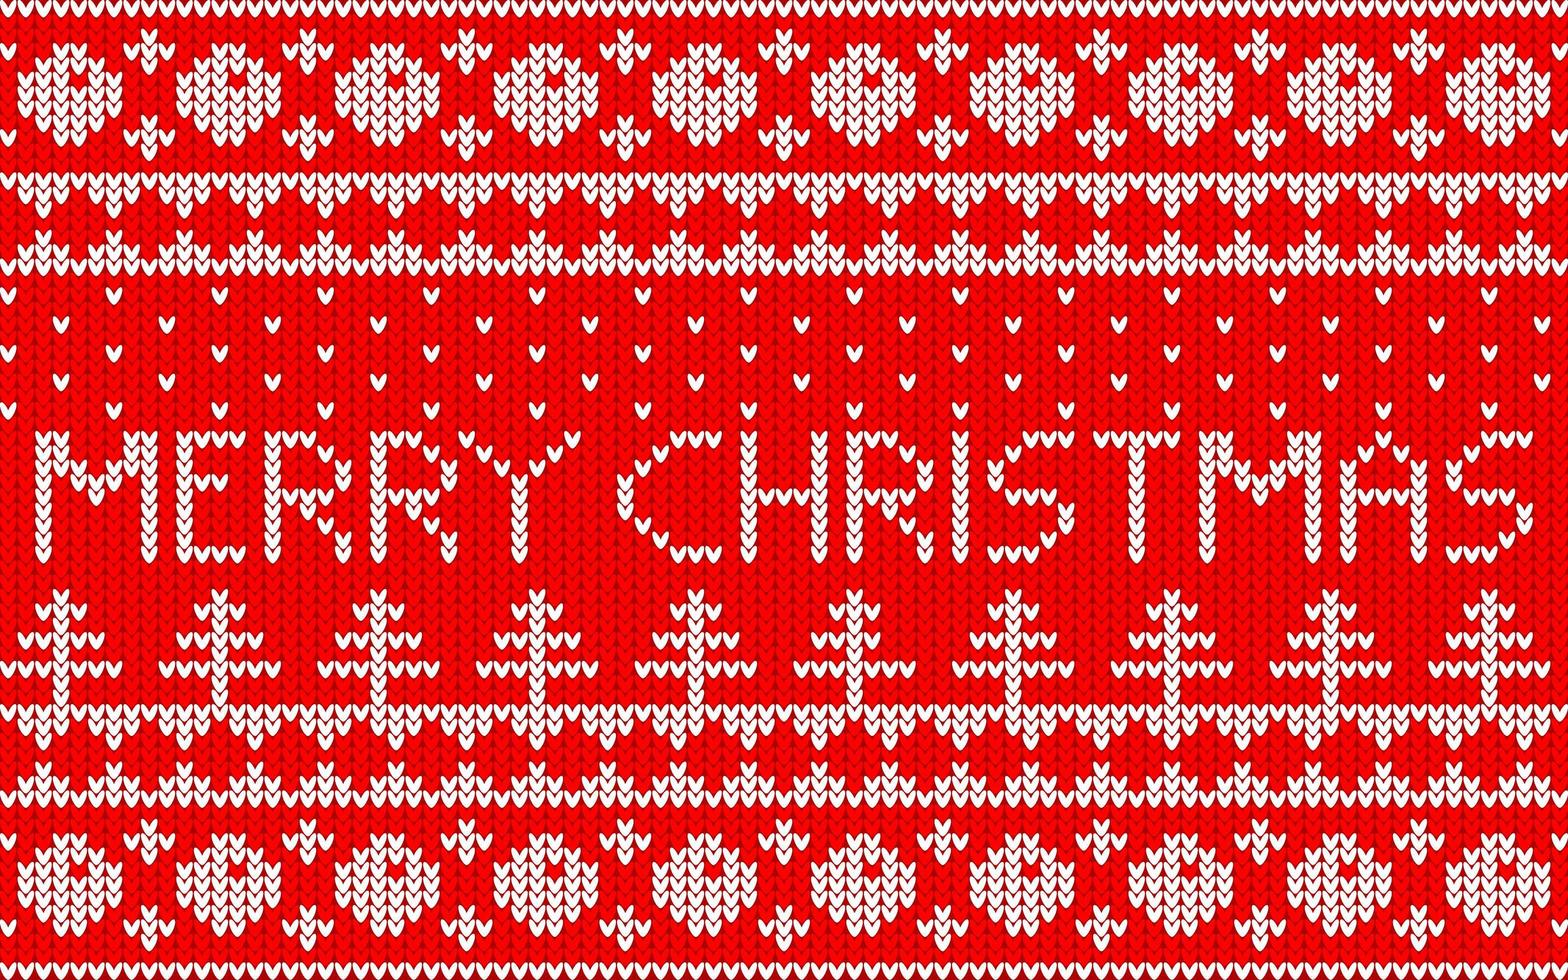 Jacquard pattern for Christmas vector